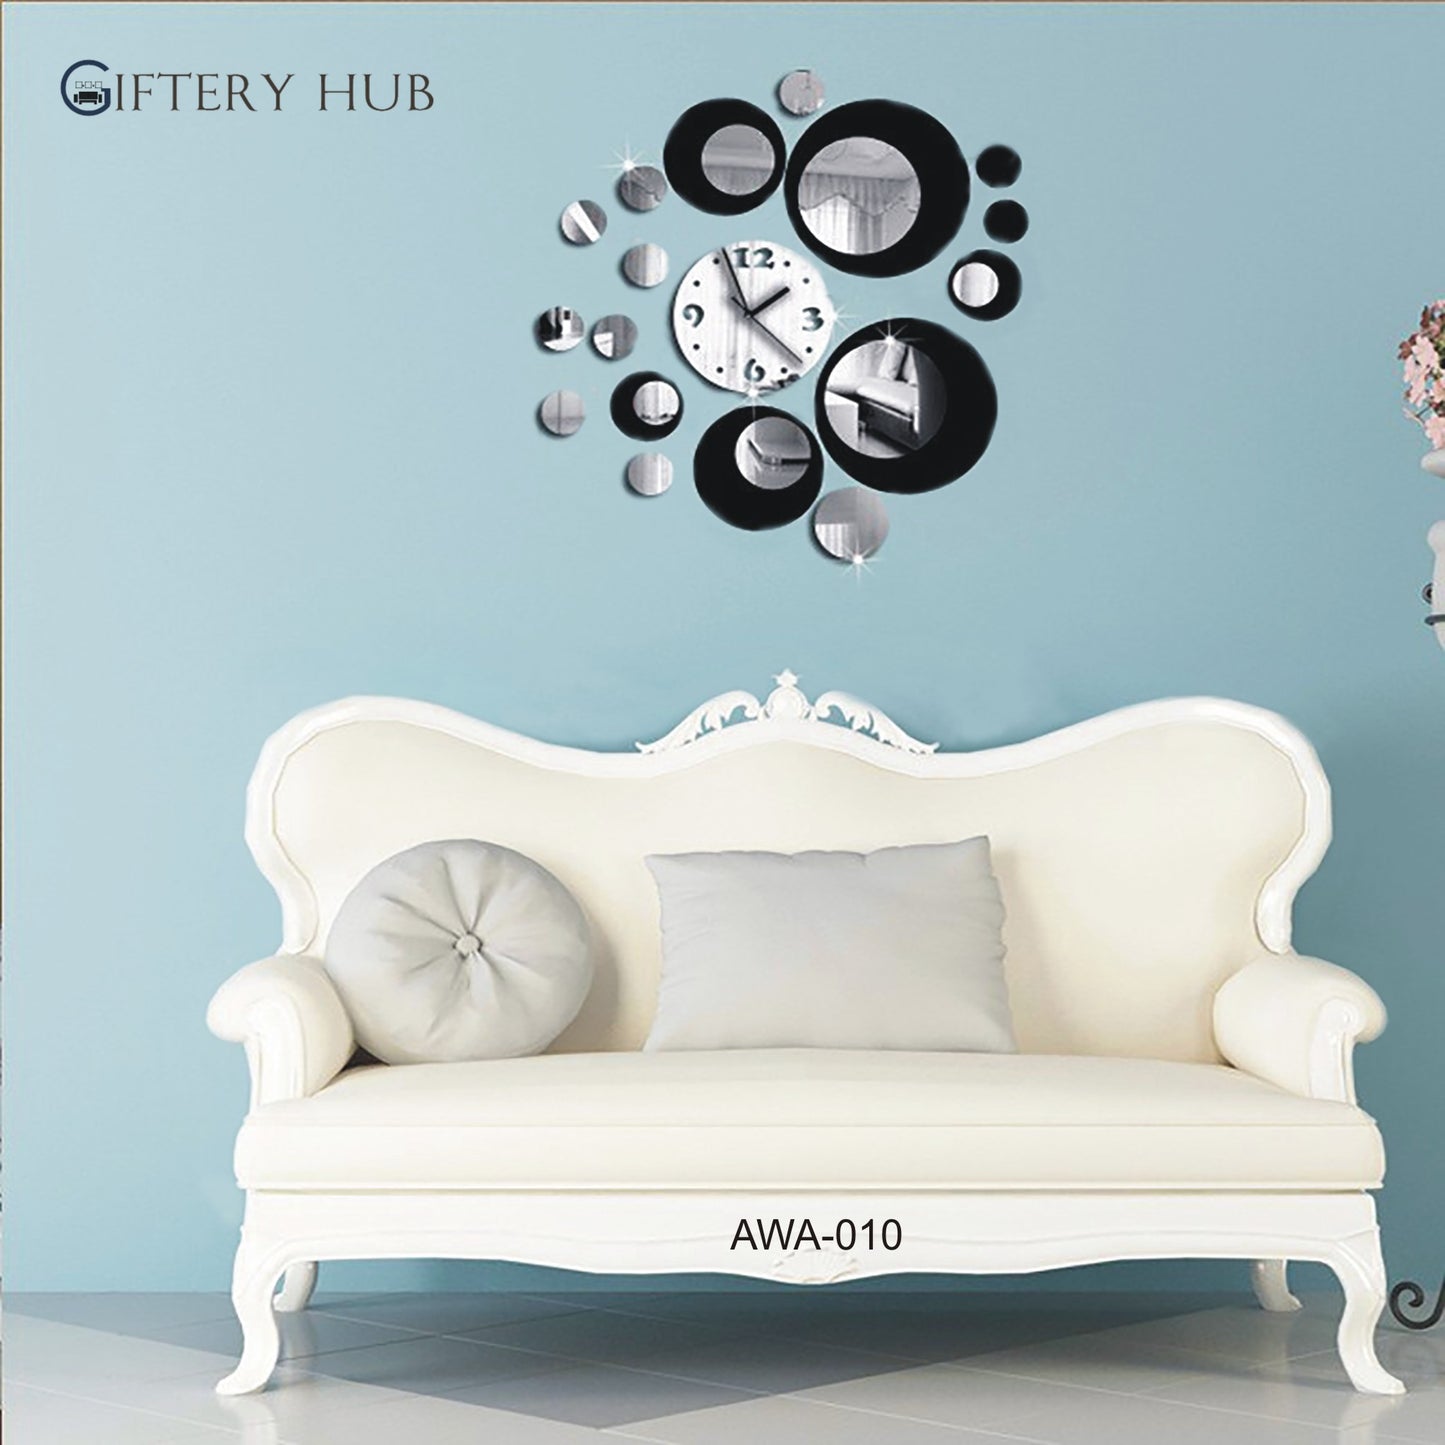 Acrylic Silver and Black Circle Wall Clock for Home and office - AWA-010